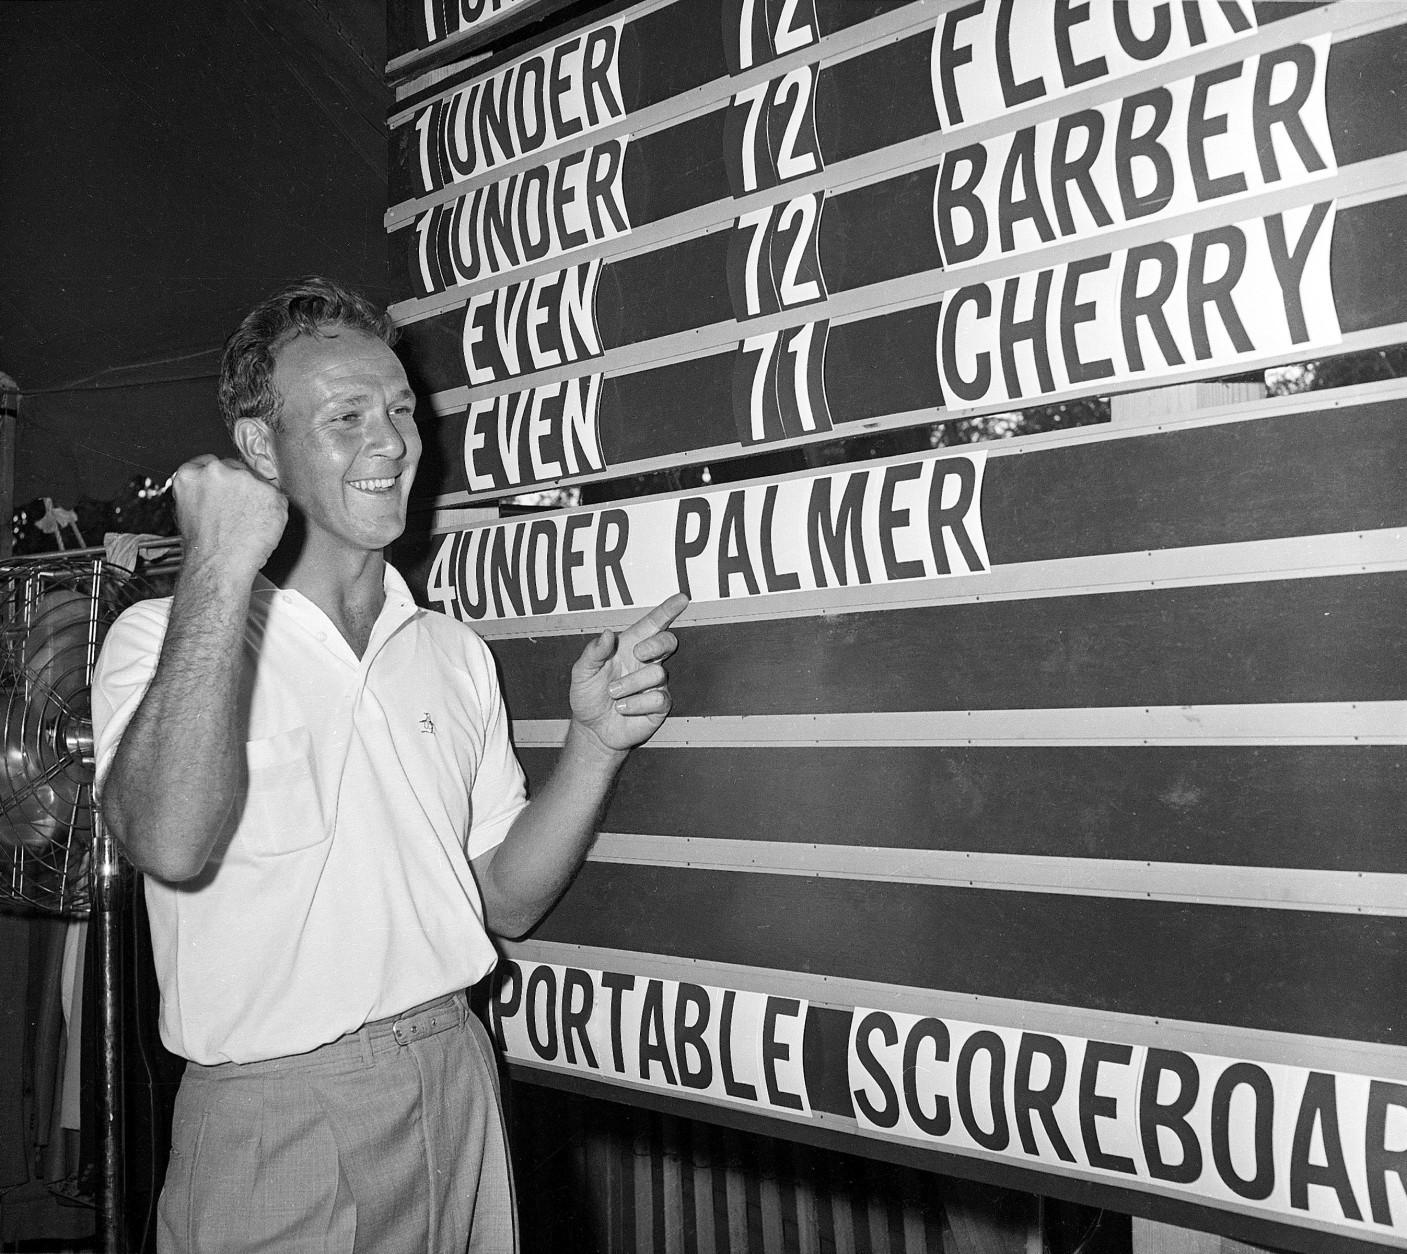 FILE - This June 19, 1960, file photo shows Arnold Palmer pointing to his name on the press tent scoreboard showing his four-under-par total, for 72 holes, during the National Open golf tournament at the Cherry Hills Country Club in Denver, Colo. Palmer, who made golf popular for the masses with his hard-charging style, incomparable charisma and a personal touch that made him known throughout the golf world as "The King," died Sunday, Sept. 25, 2016, in Pittsburgh. He was 87. (AP Photo/File)